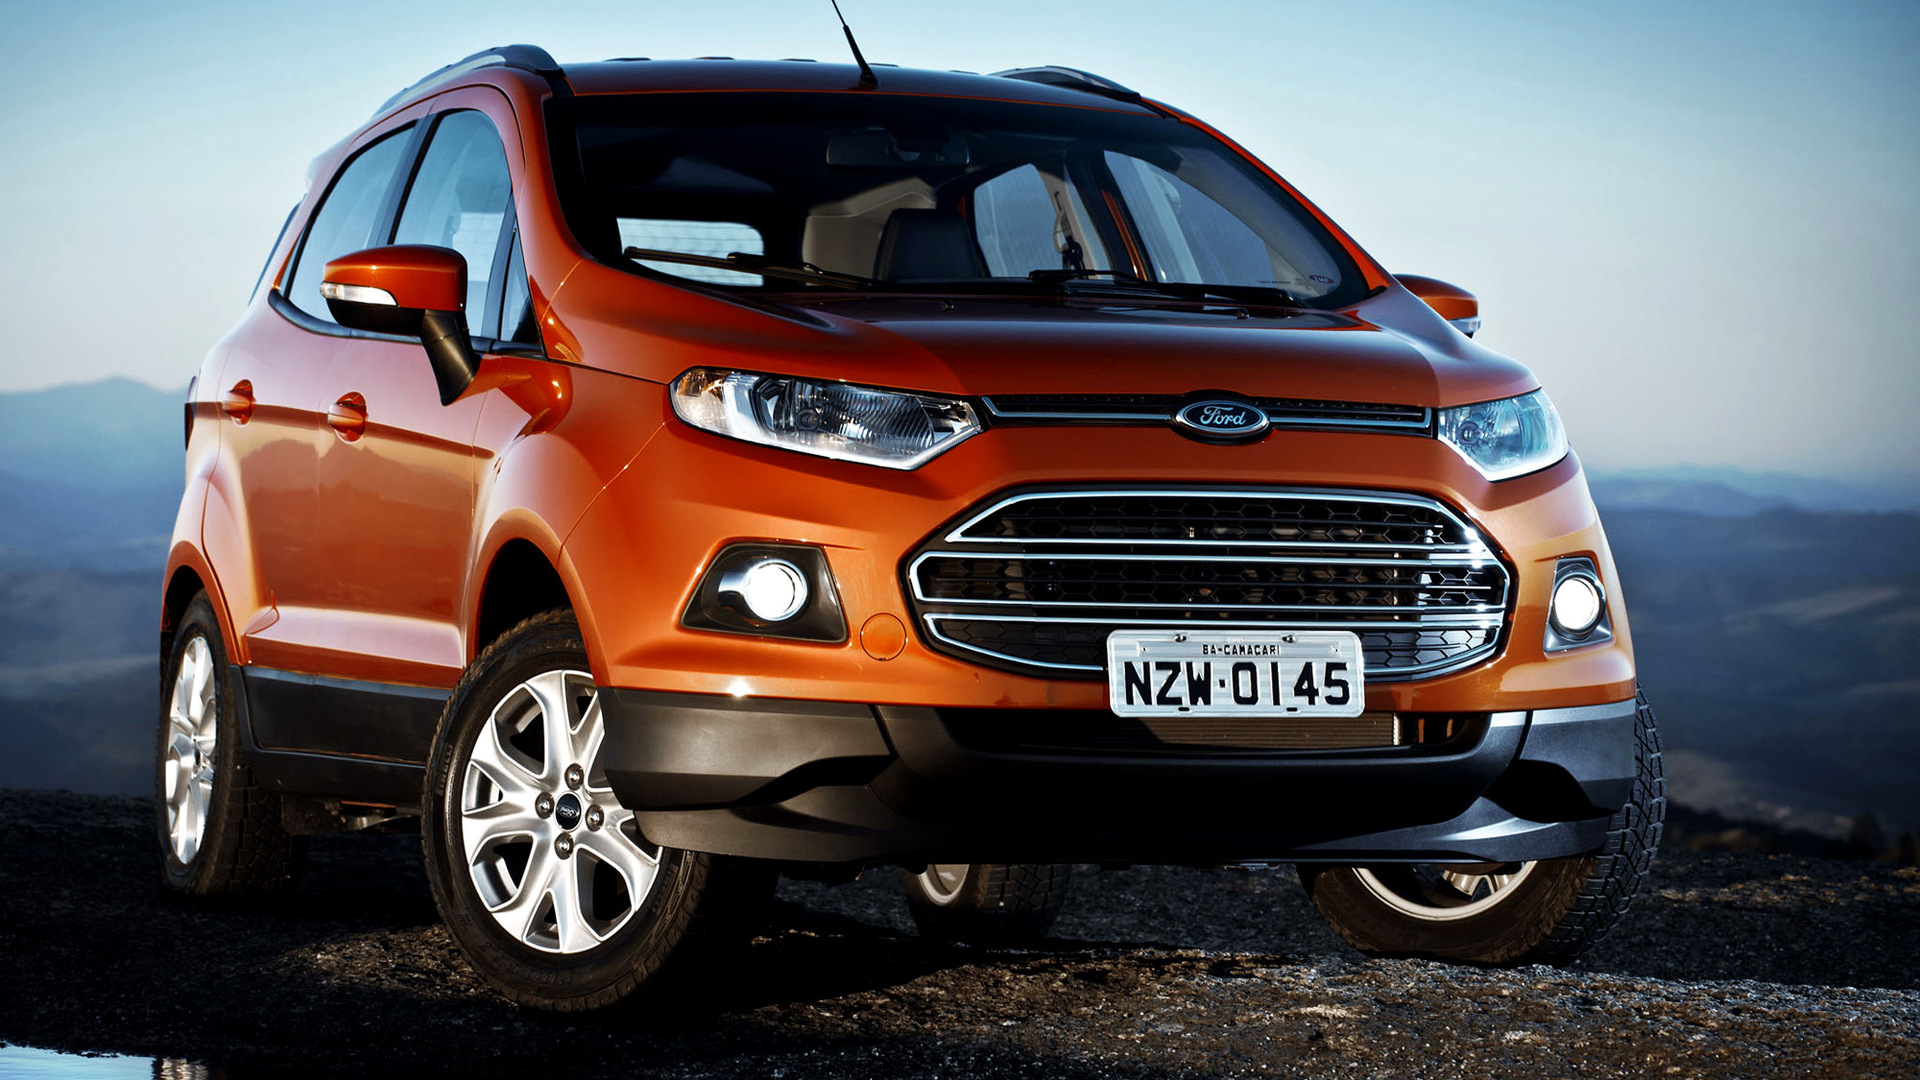 2012 Ford EcoSport Wallpapers HD  DriveSpark